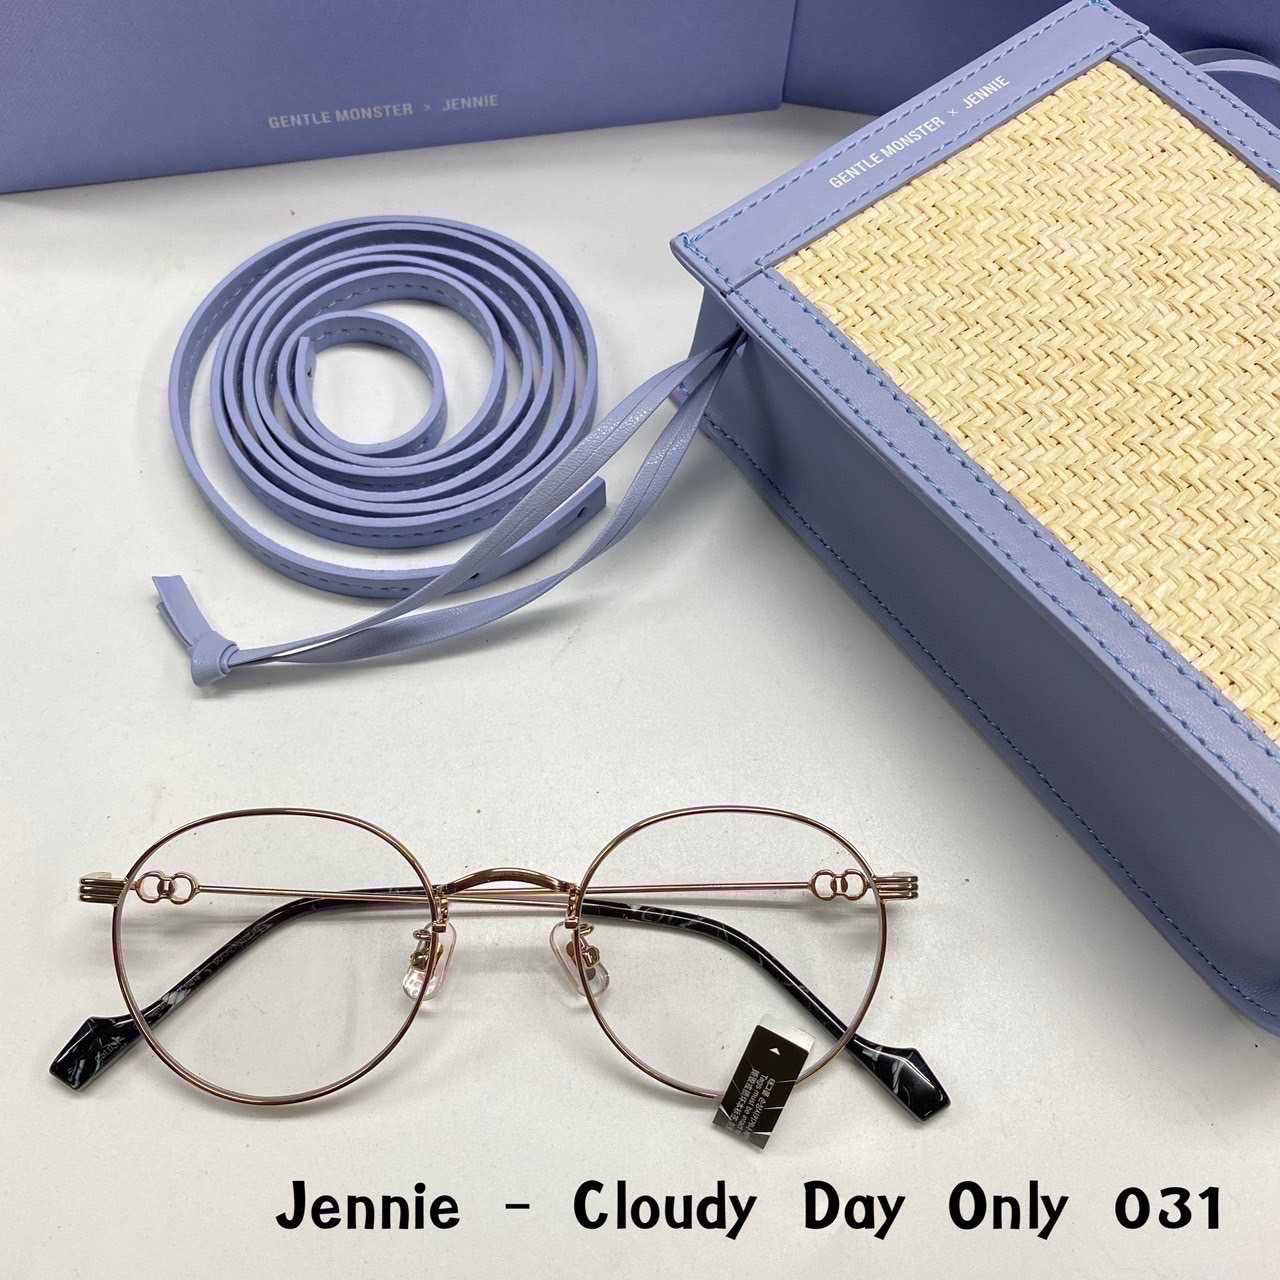 Jennie - Cloudy Day Only 031